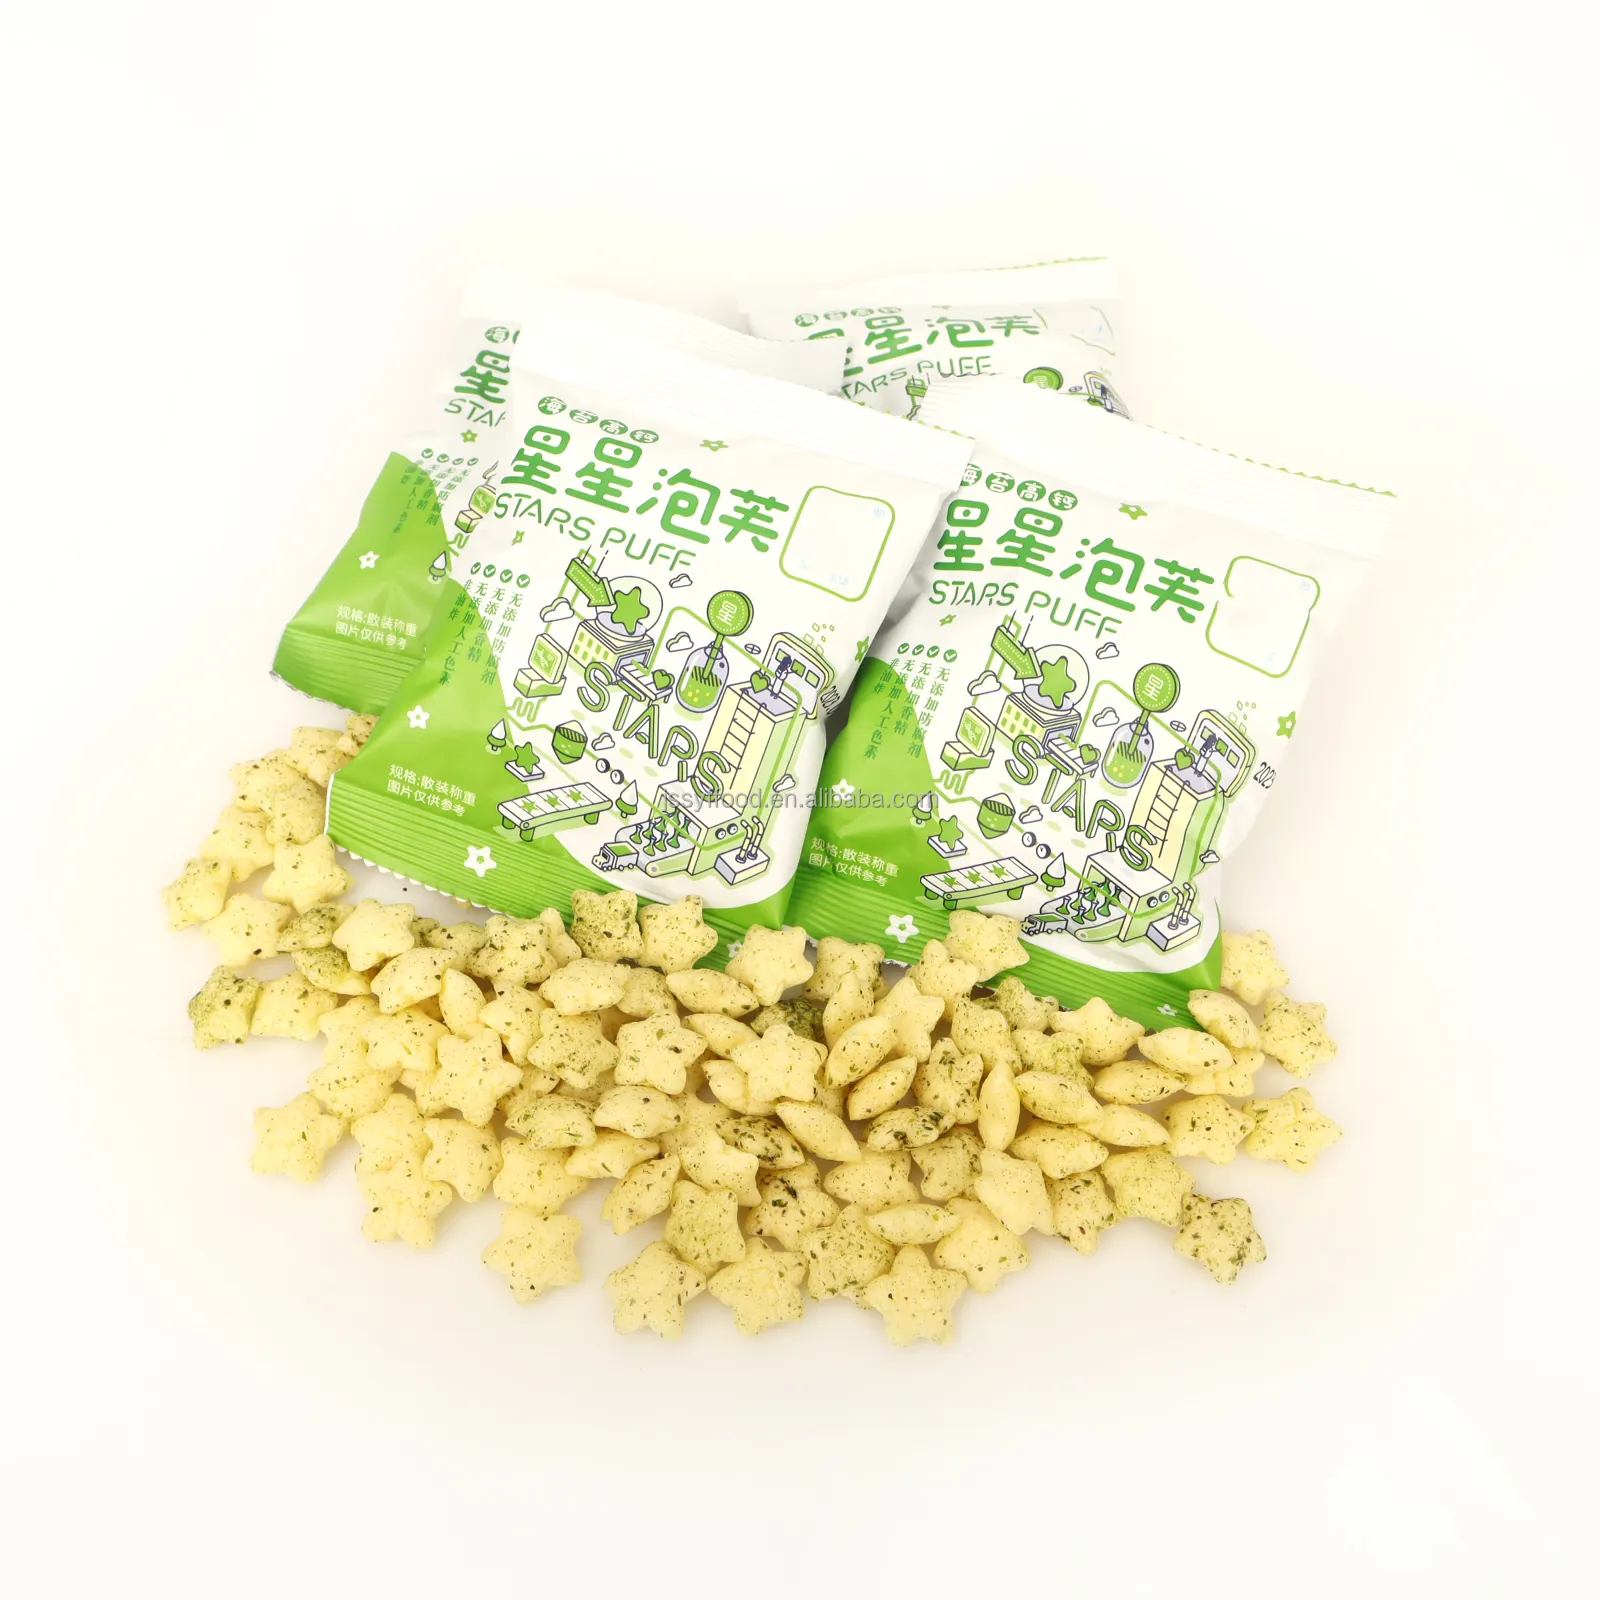 Factory direct sale wholesale healthy snacks children's casual snacks Cereal nori flavour Puff snack